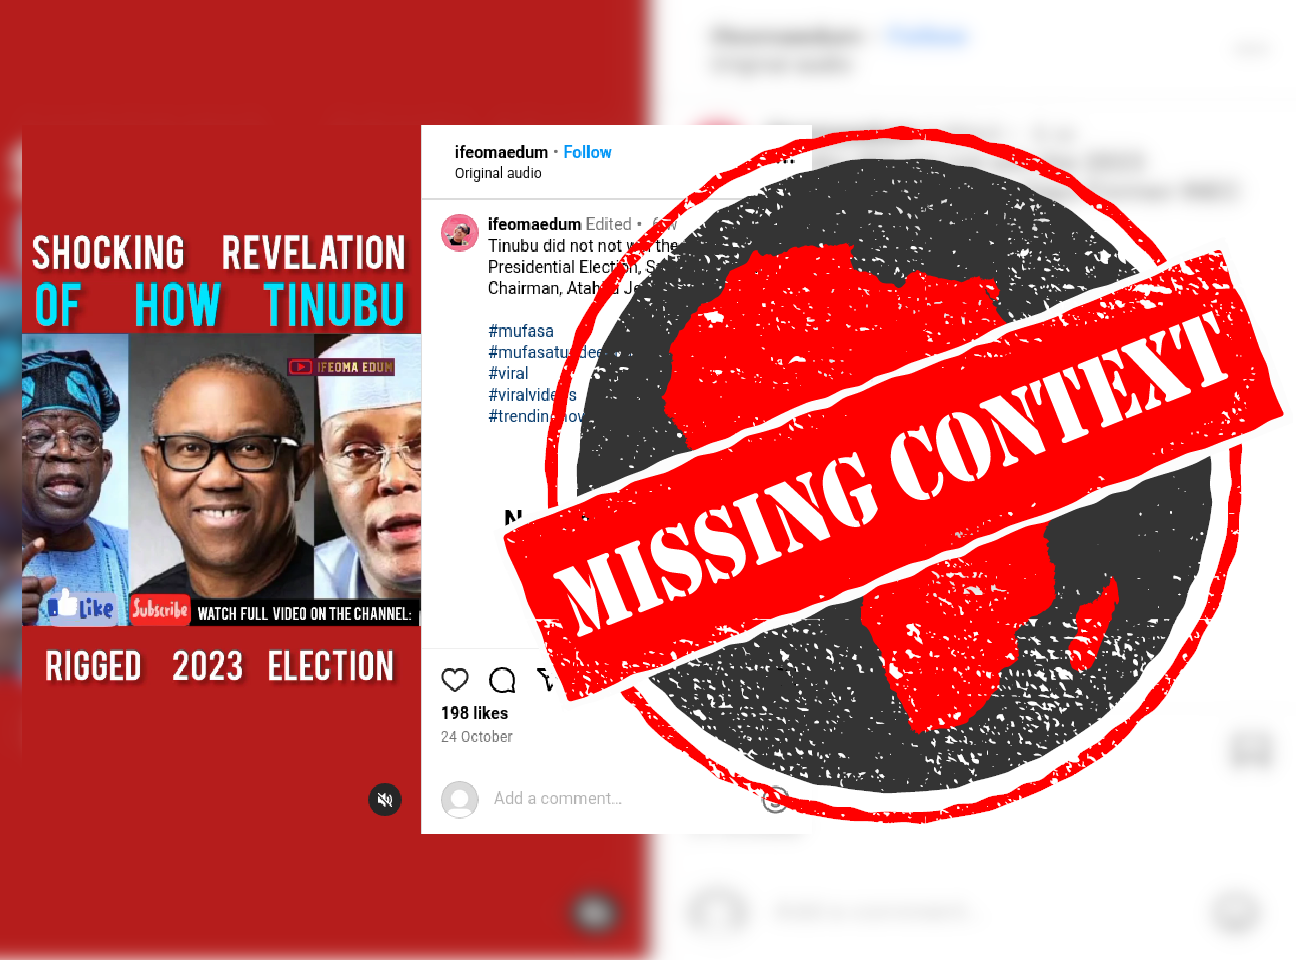 Claim about Tinubu election rigging with missing context